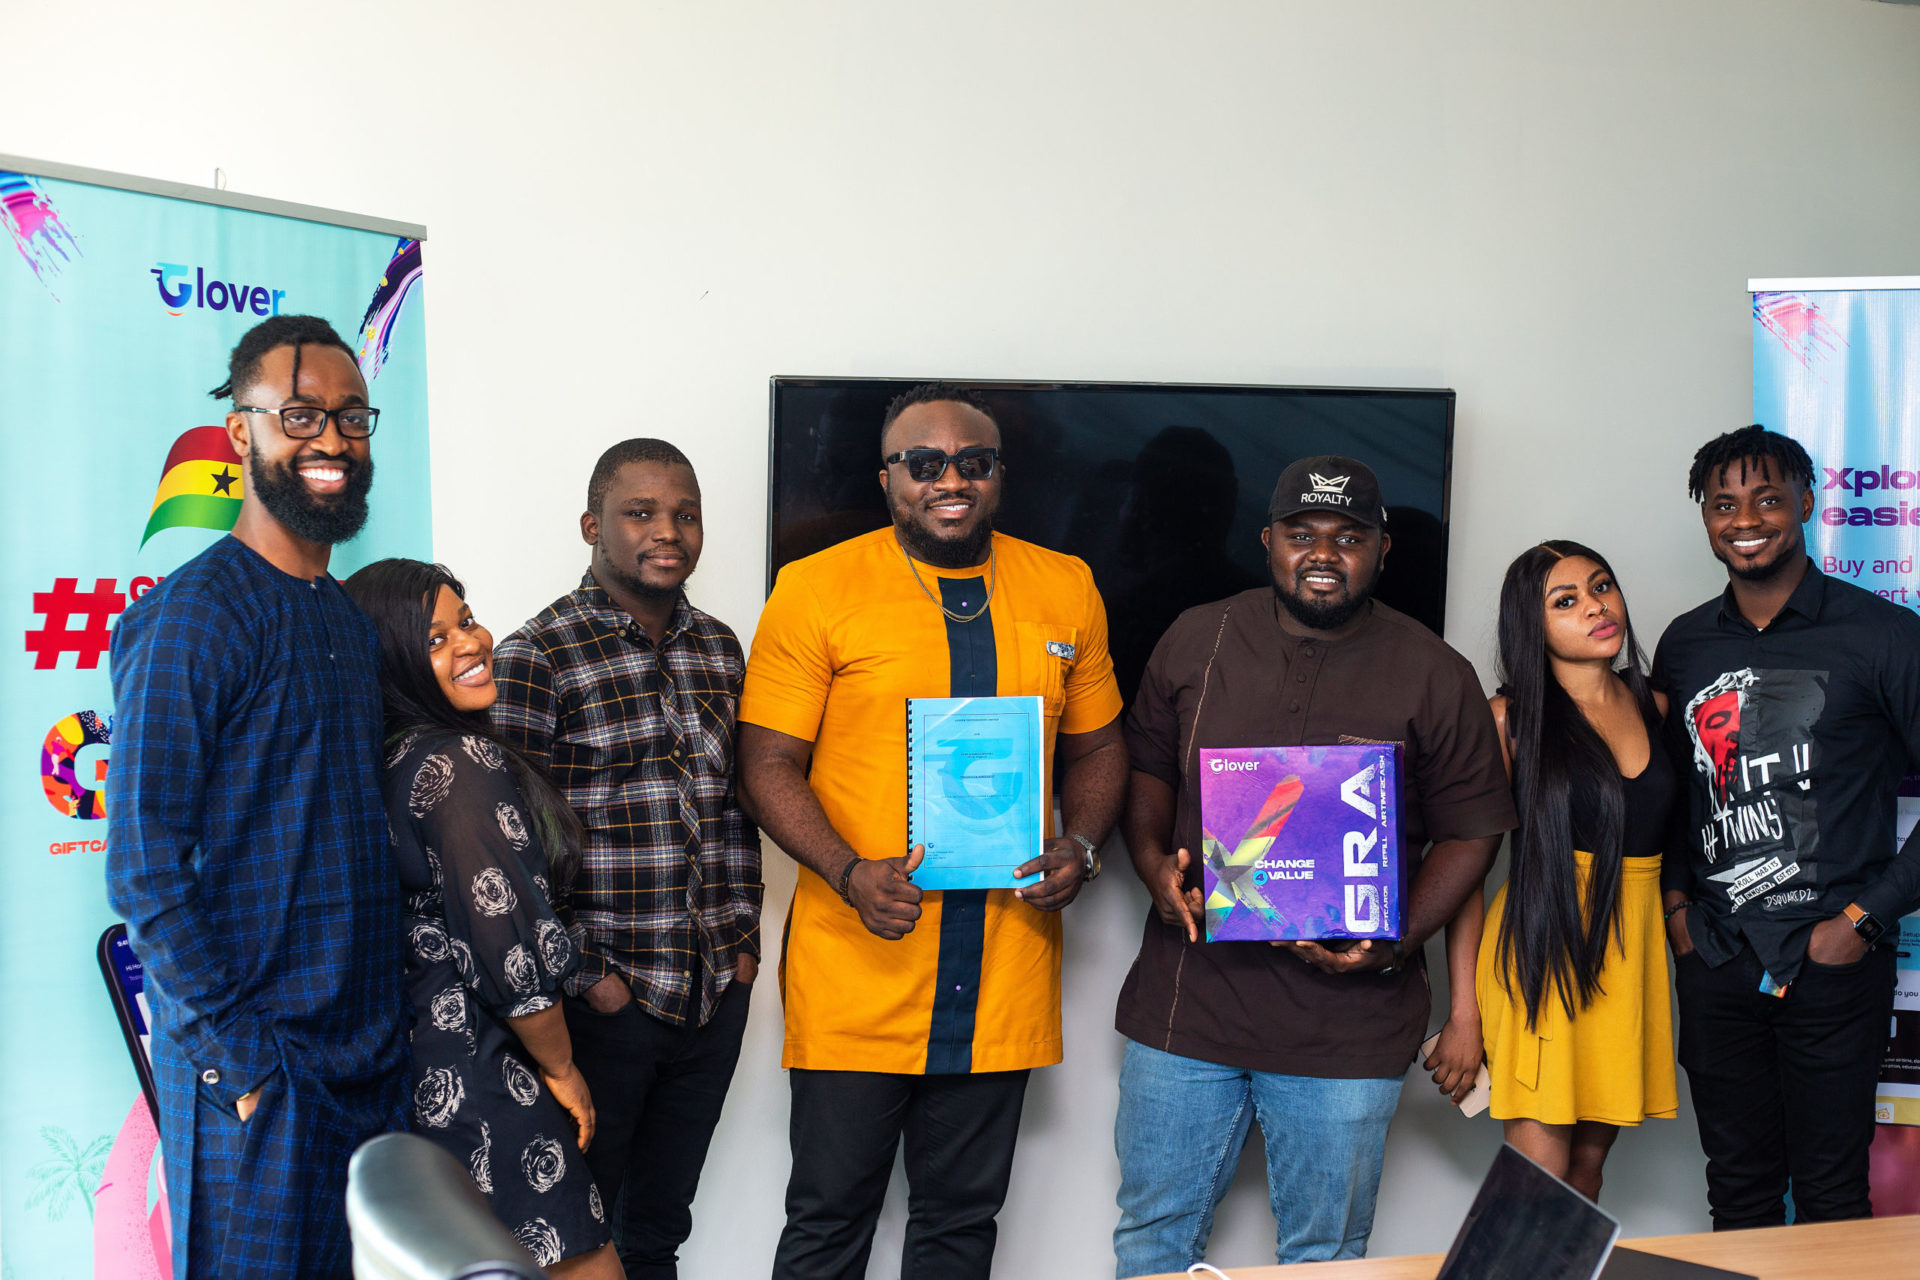 Glover Takes Ghana And Kicks Off Business Operations, Onboards DKB, Fella Makafui And Six Other Leading Media Influencers